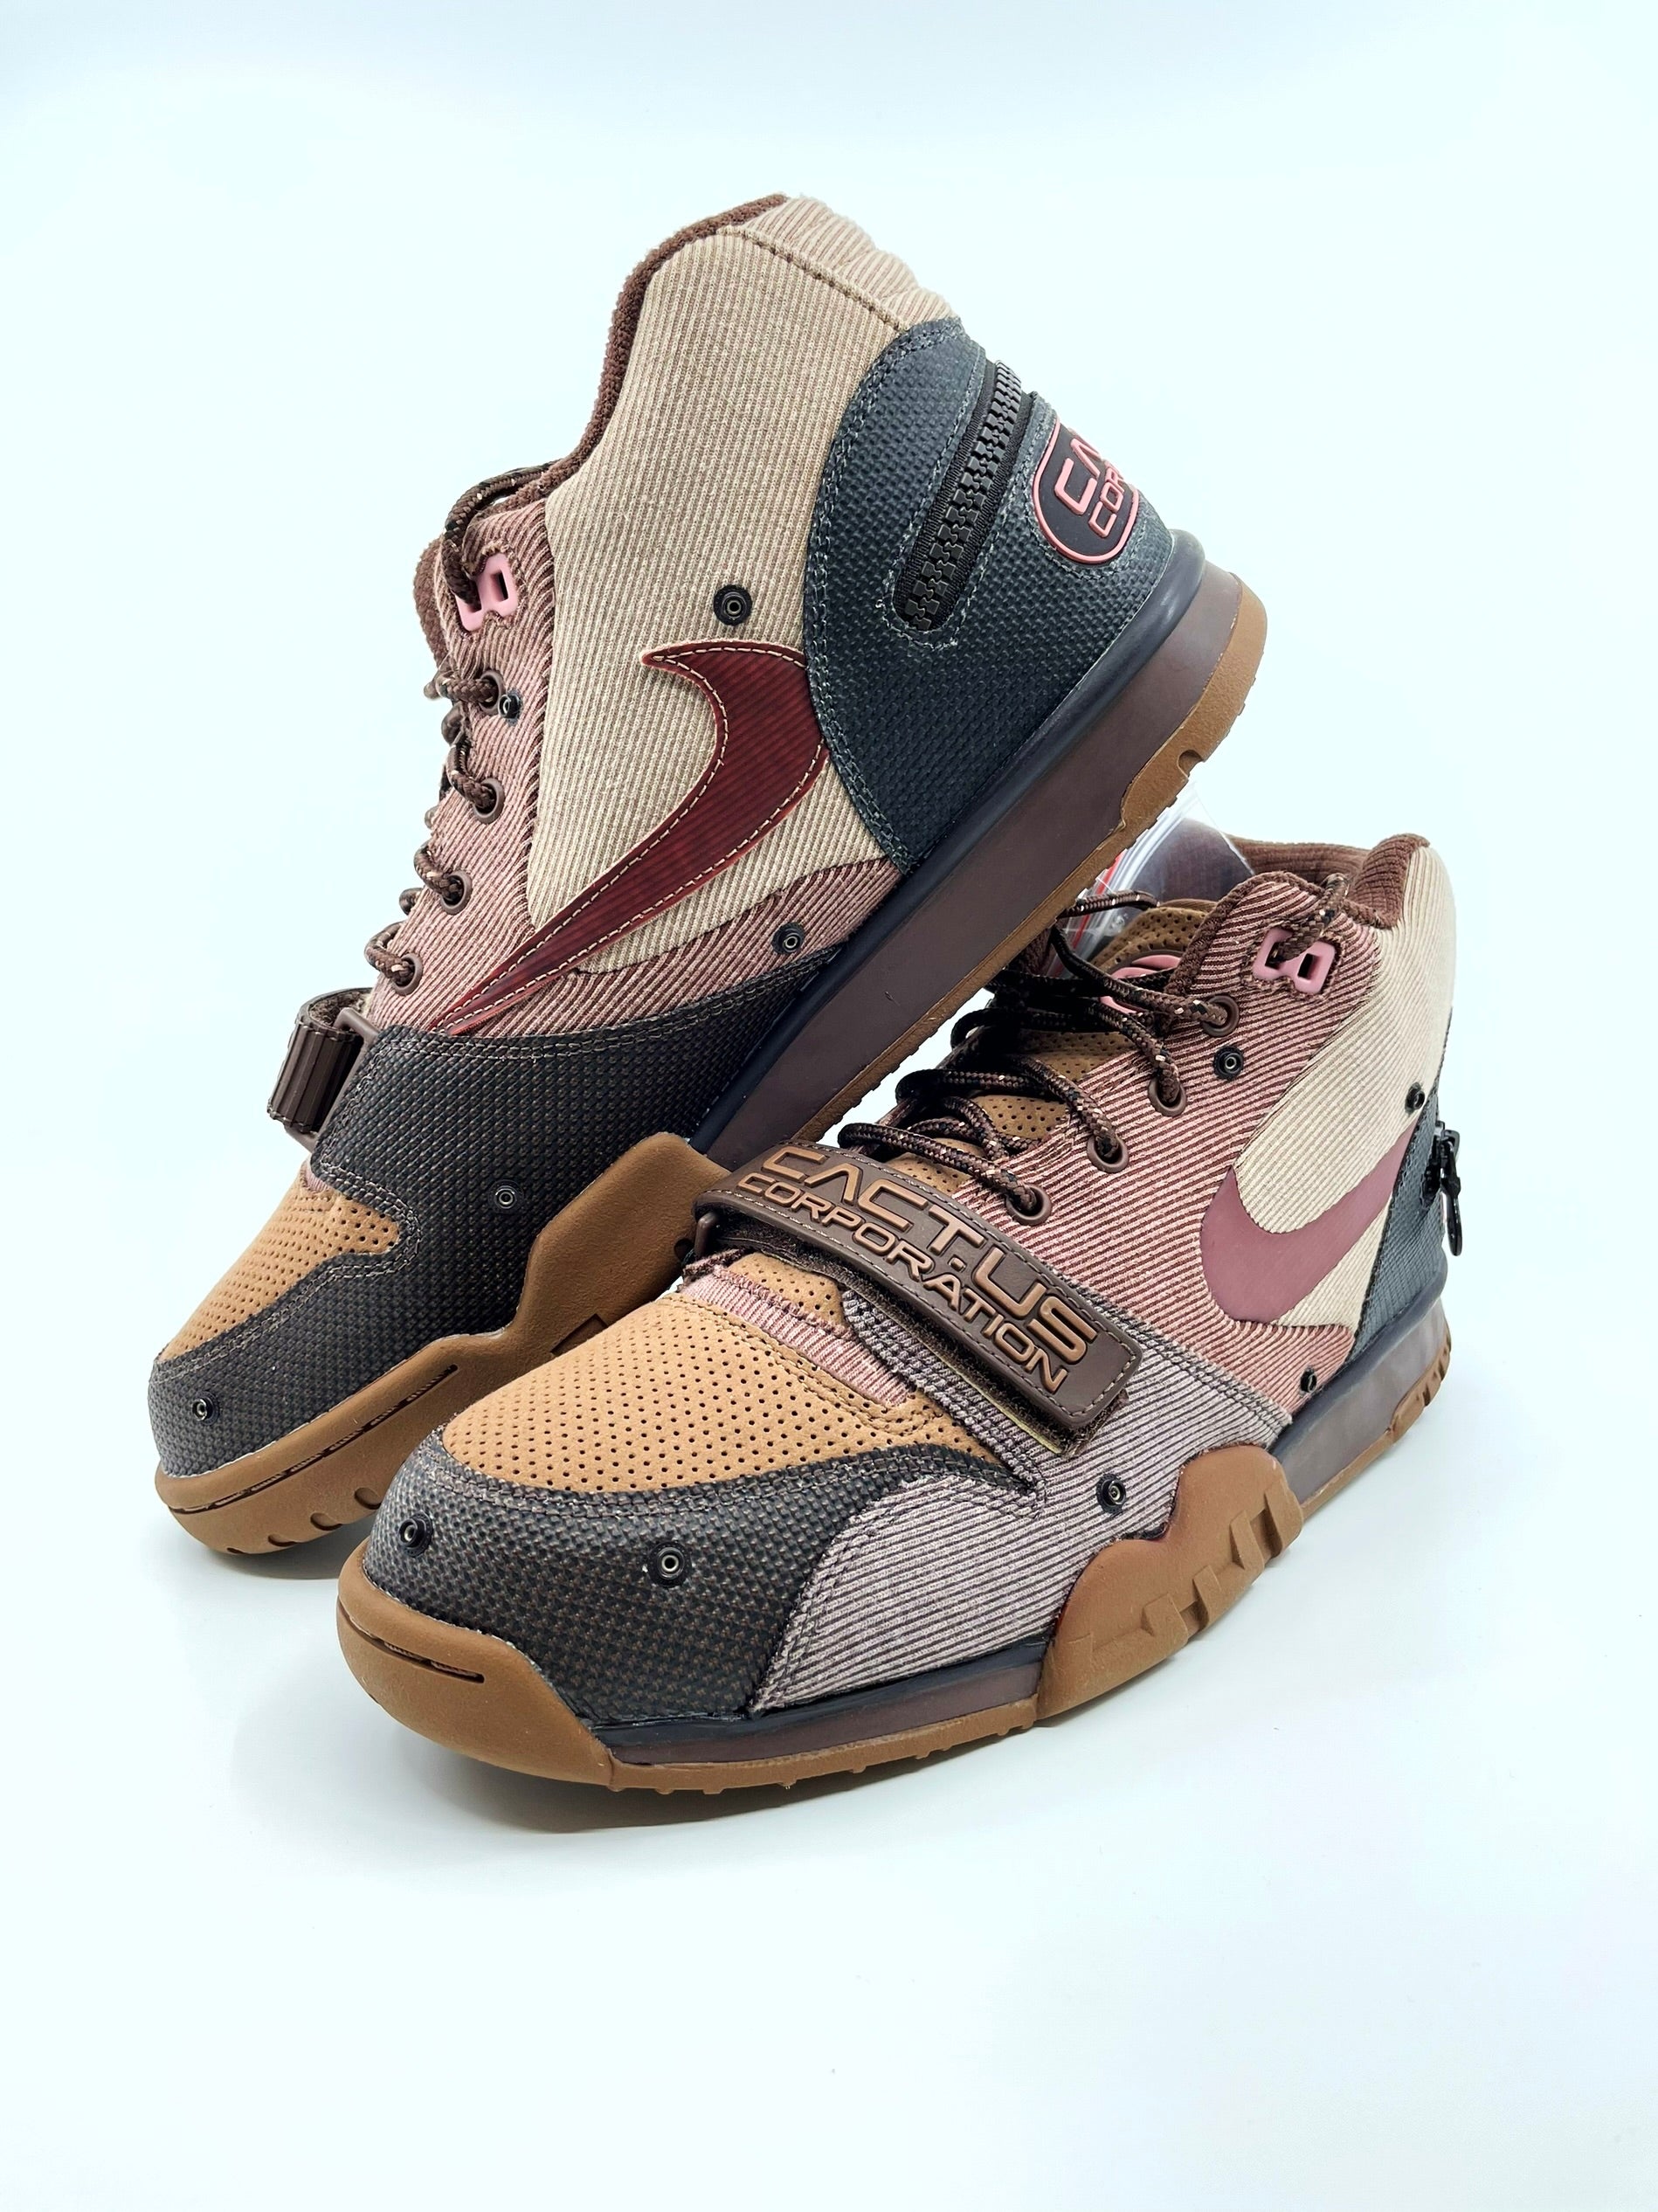 Nike Air Trainer 1 SP Travis Scott Wheat – The Overtime Store